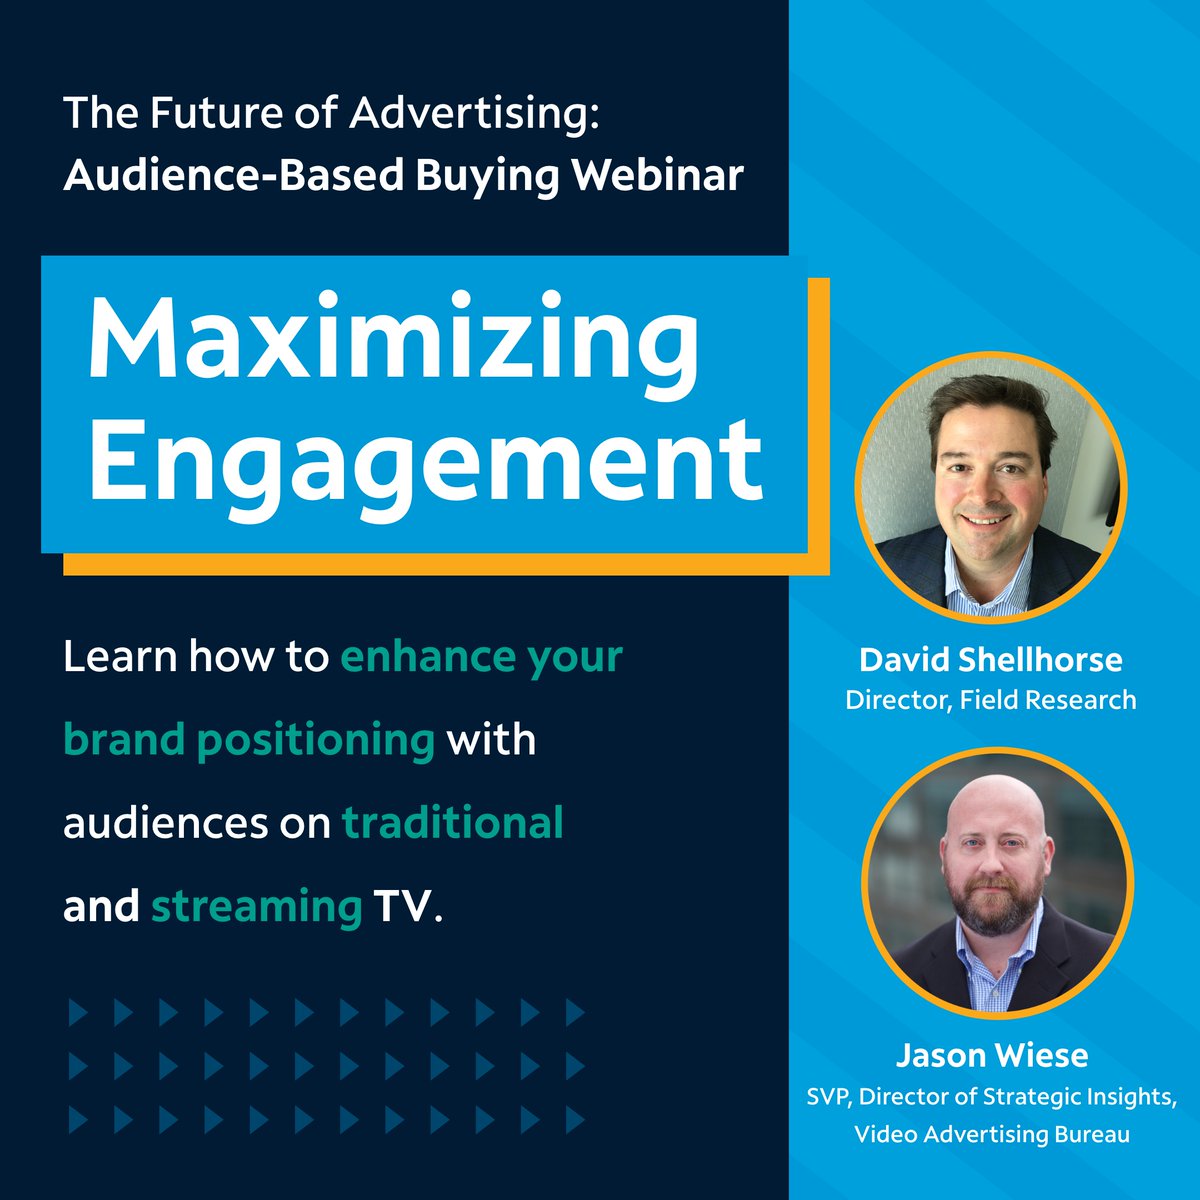 Having your customers watching a mix of streaming and traditional TV can work to your advantage. Check out our exclusive webinar on The Future of Advertising: Audience-Based Buying and learn how engaging your audiences effectively is the key to success. ow.ly/sh0350QQFY6